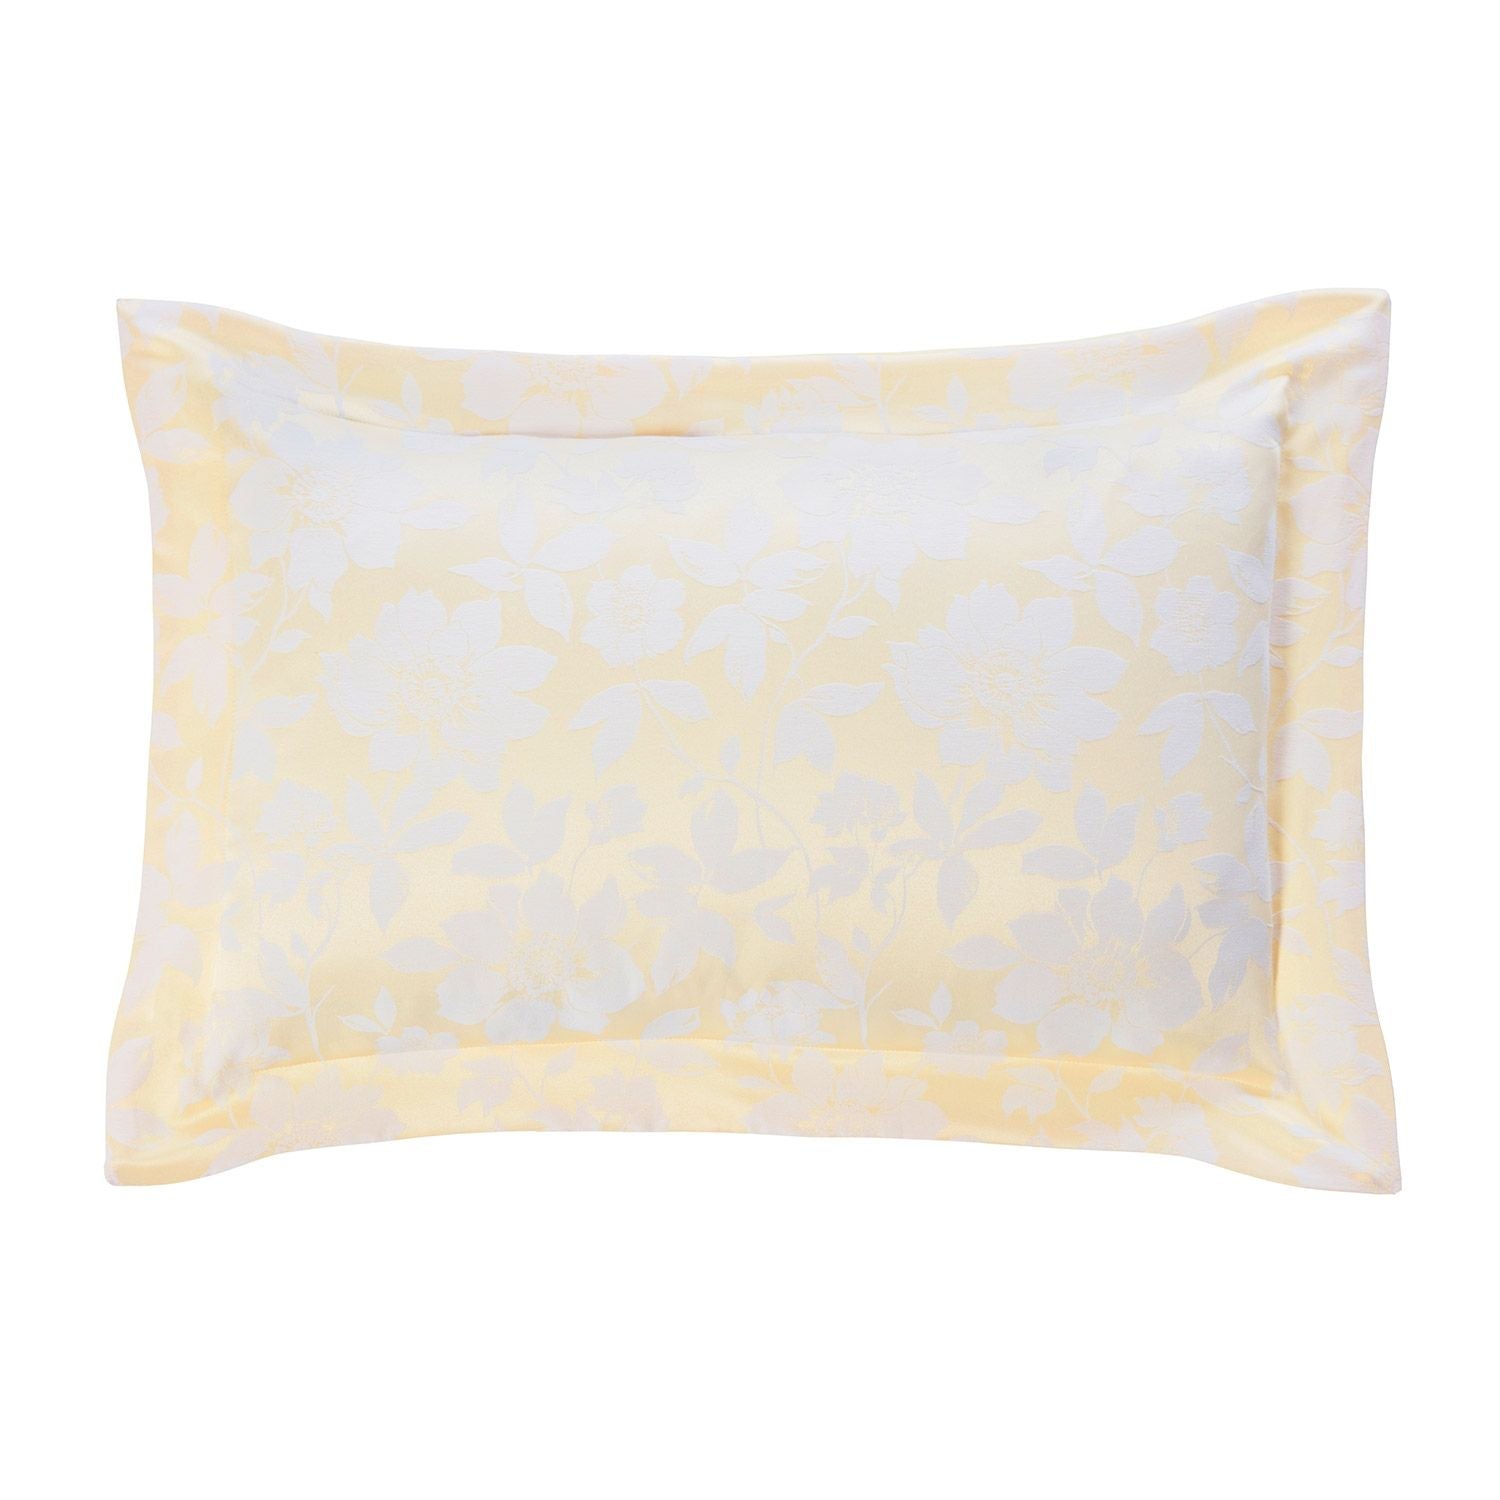 Julian Charles Lottie Oxford Pillow 1 Shaws Department Stores